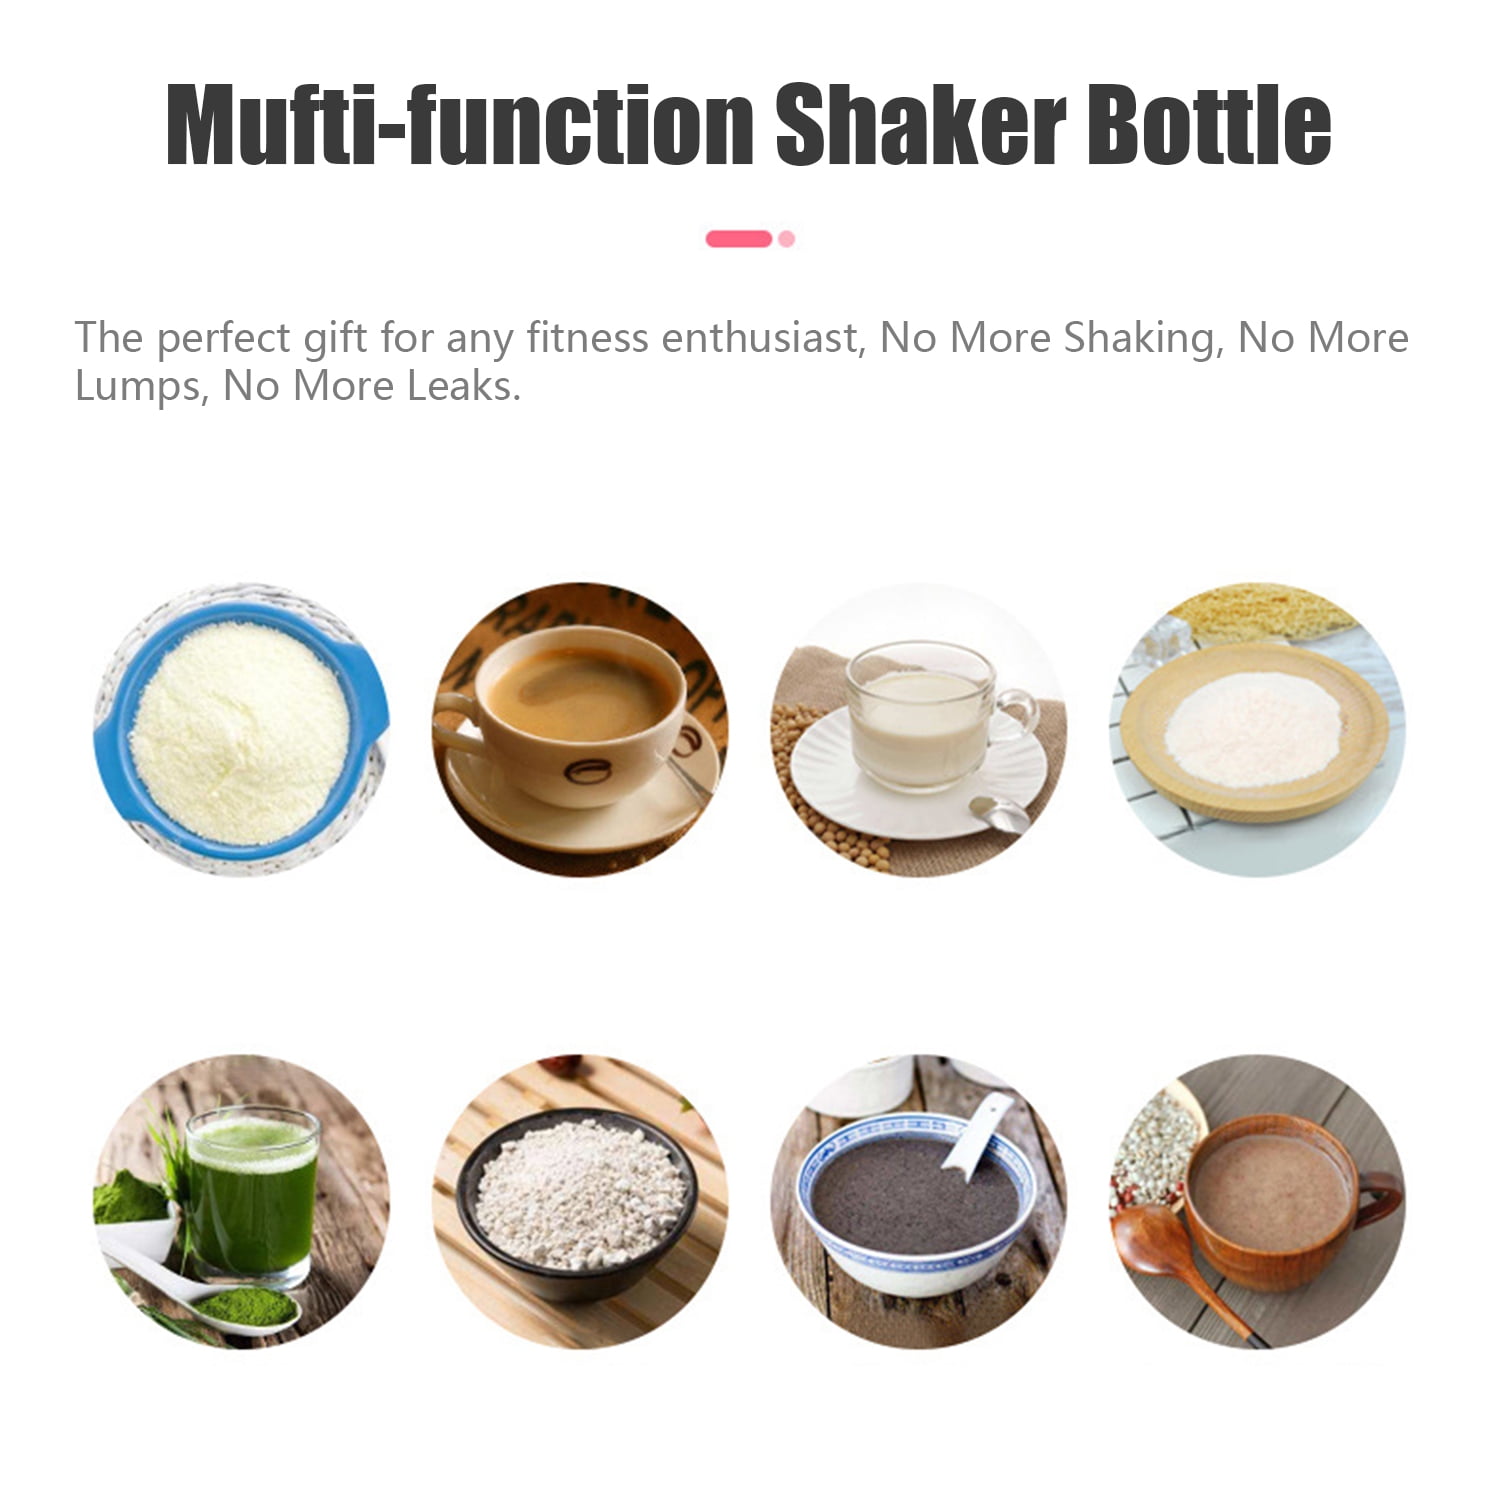 Qunan 380mL Electric Protein Shaker Bottle Portable M er Cup Powered Coffee Shaker  Cups plement M er for Protein Shakes Gym Pre-Workout 